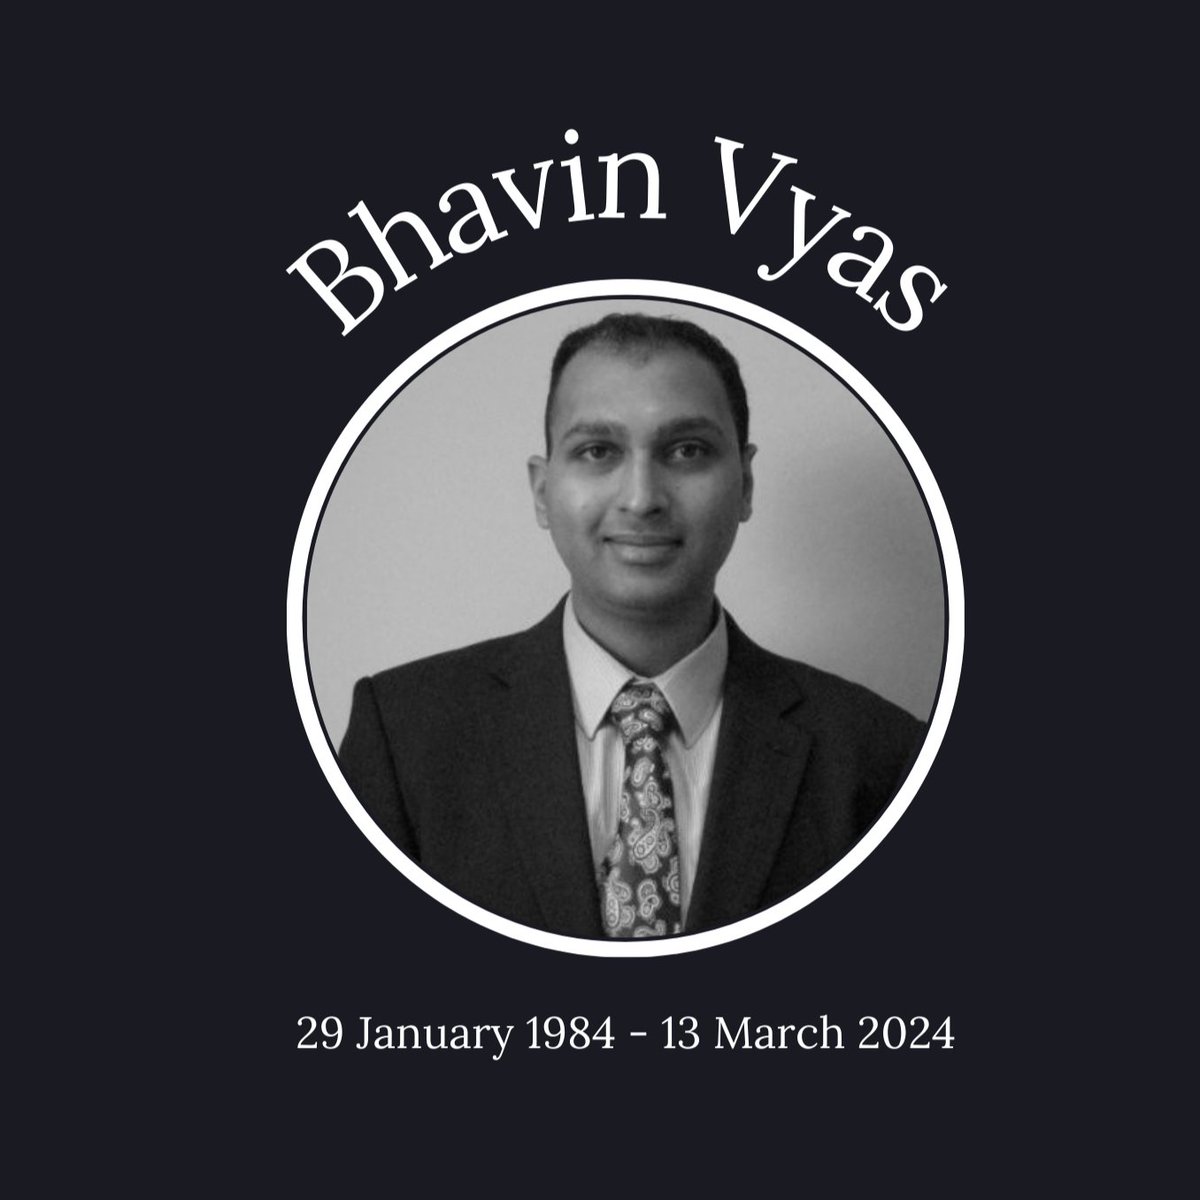 We are extremely sorry to inform you that our colleague Bhavin Vyas passed away following a period of illness. Bhavin has been a valued colleague for 7+years.  His enthusiasm, kind nature and good humour will be hugely missed. Rest in peace Bhavin Vyas 1984 – 2024